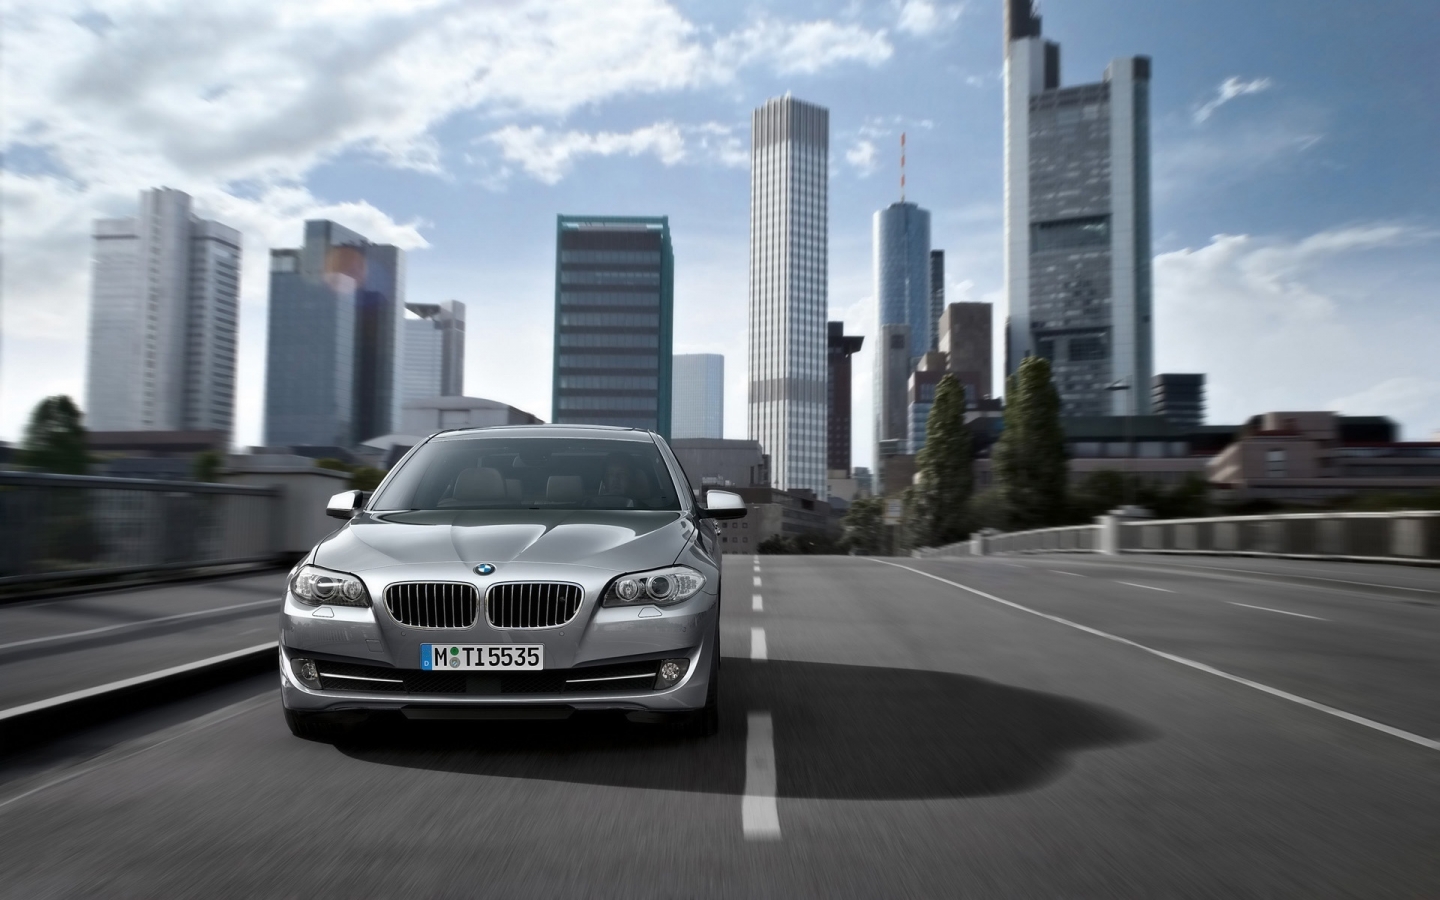 BMW 5 Series Sedan 2010 Front for 1440 x 900 widescreen resolution